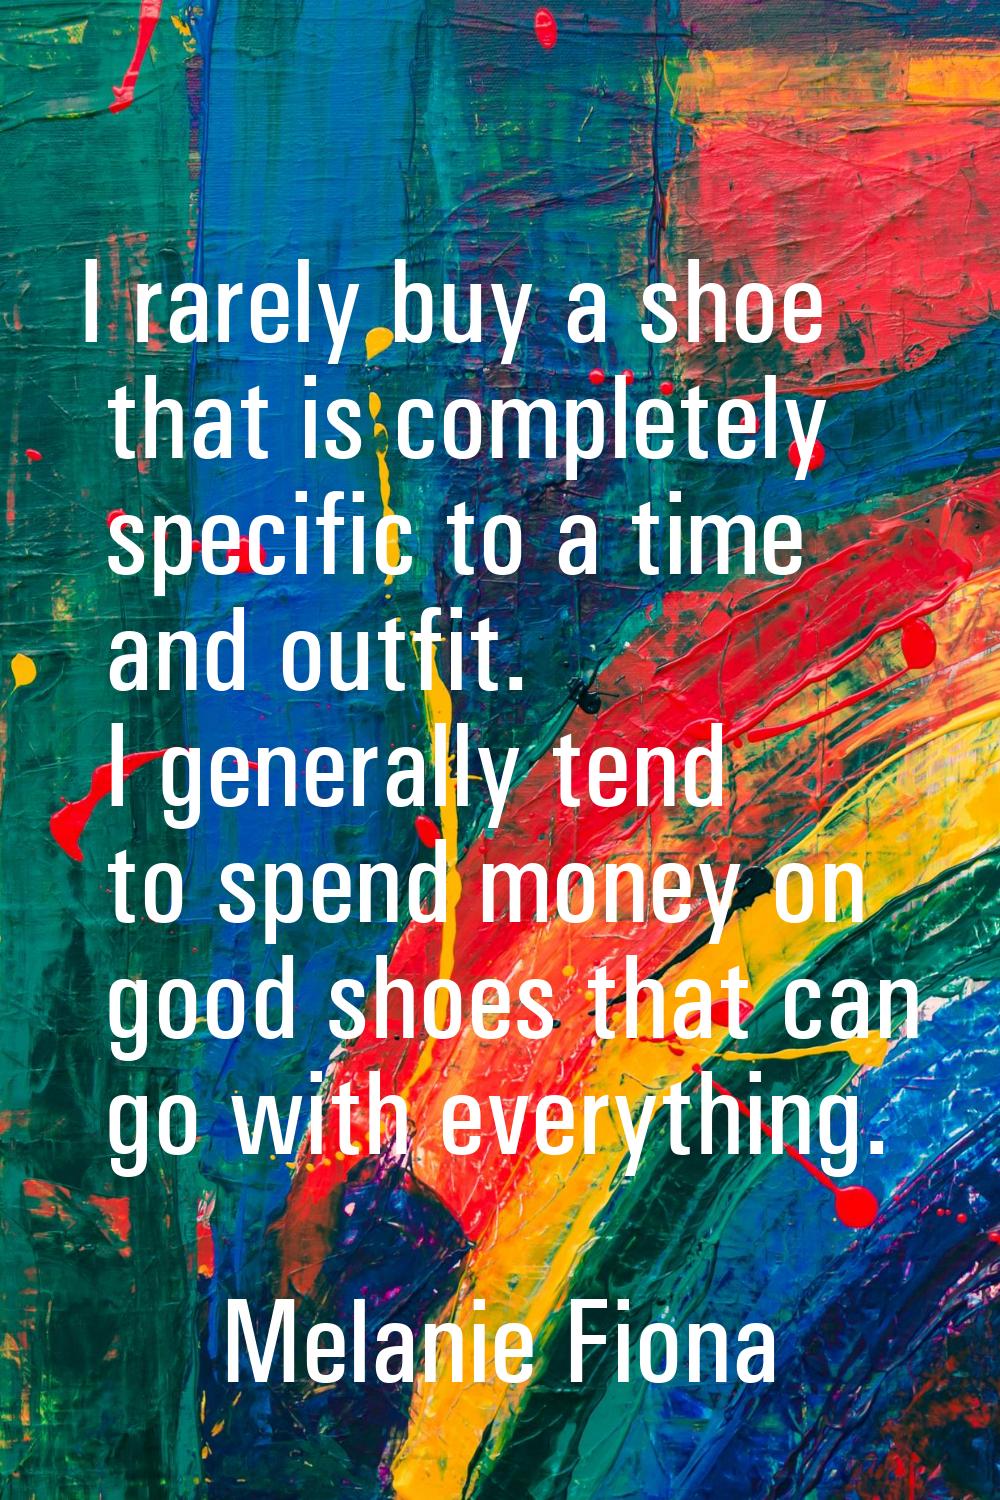 I rarely buy a shoe that is completely specific to a time and outfit. I generally tend to spend mon